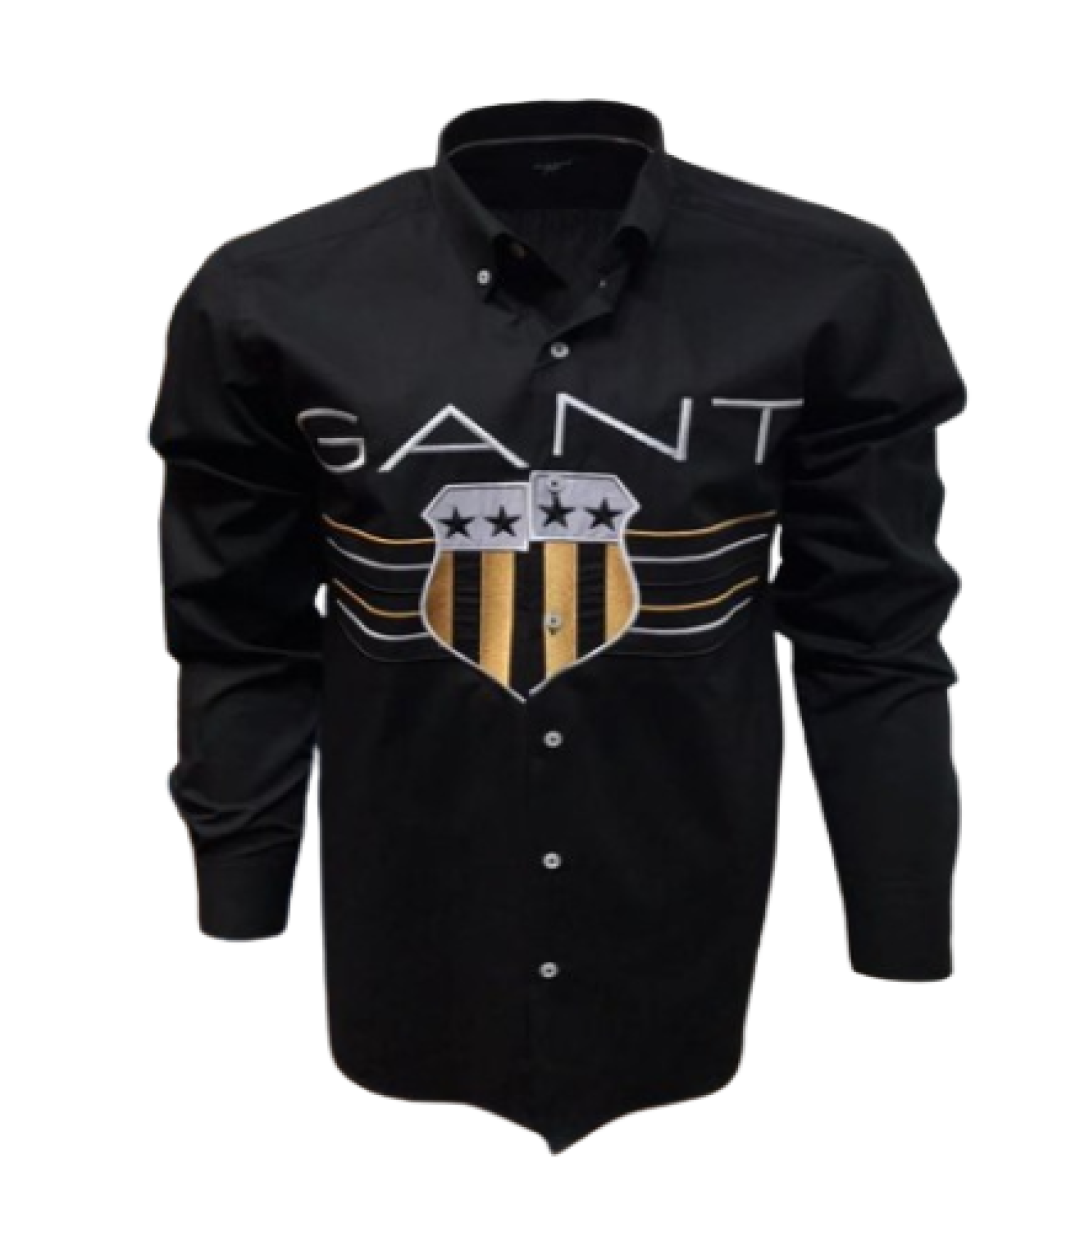 LONG SLEEVED SHIRT FOR MEN, 100% COTTON, SOFT AND SMOOTH, STYLISH, HIGH QUALITY, SIZES (S, M, L, XL, XXL) , BLACK, BY GANT